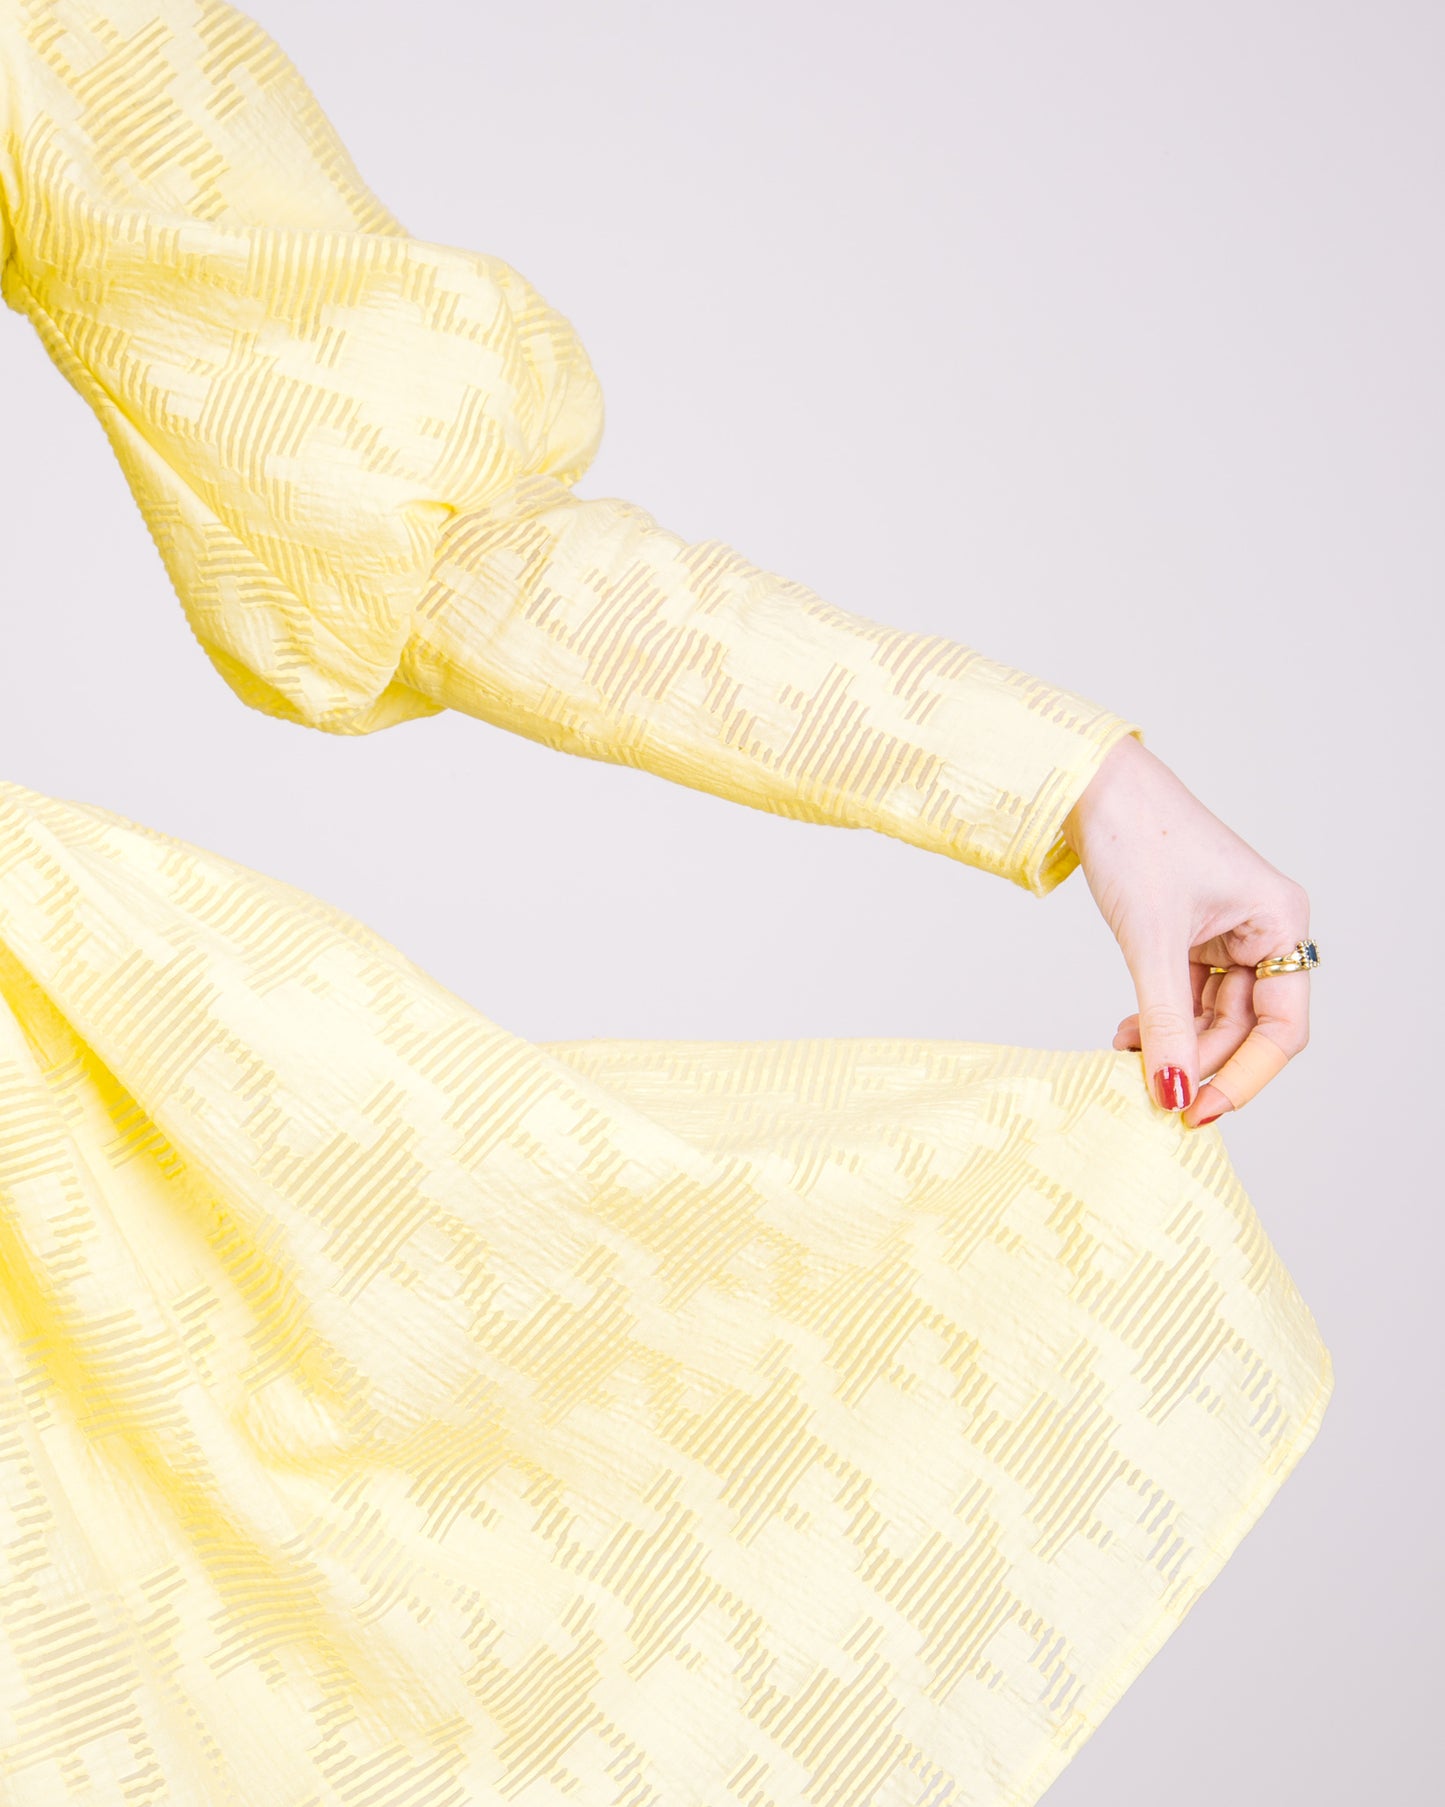 The Anna Prairie Dress in Yellow Houndstooth